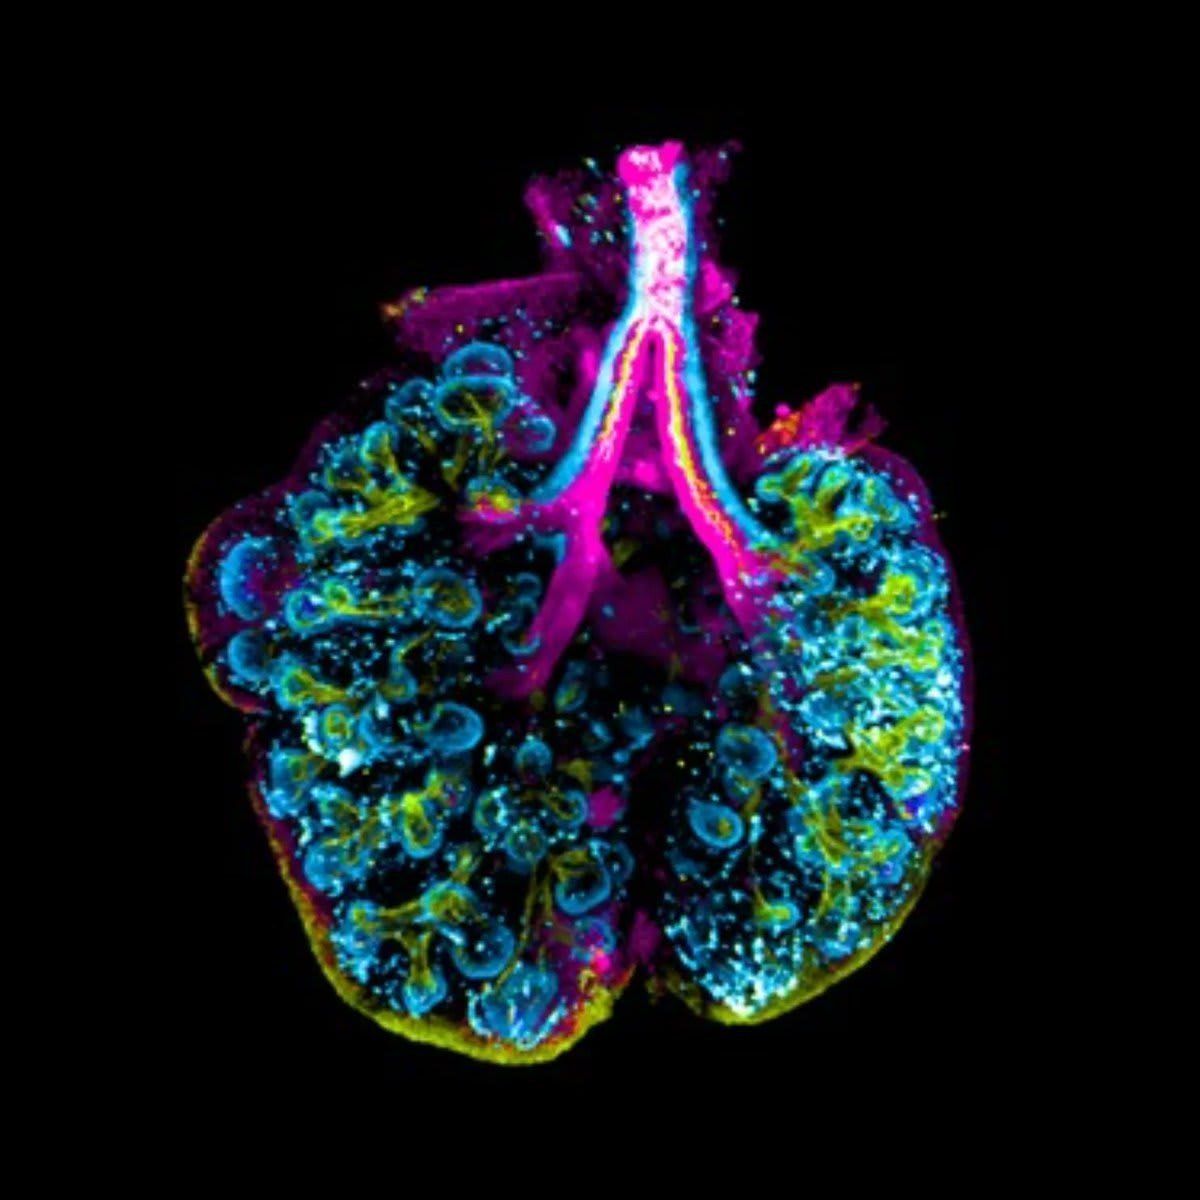 Staining lab-grown, developing lung tissue reveals the different types of stem cells composing it. These cells eventually divide into different tissues that compose our complex airways. Visualizing them allows researchers to map how lungs grow. Casey Ah-Cann/@wehi_research